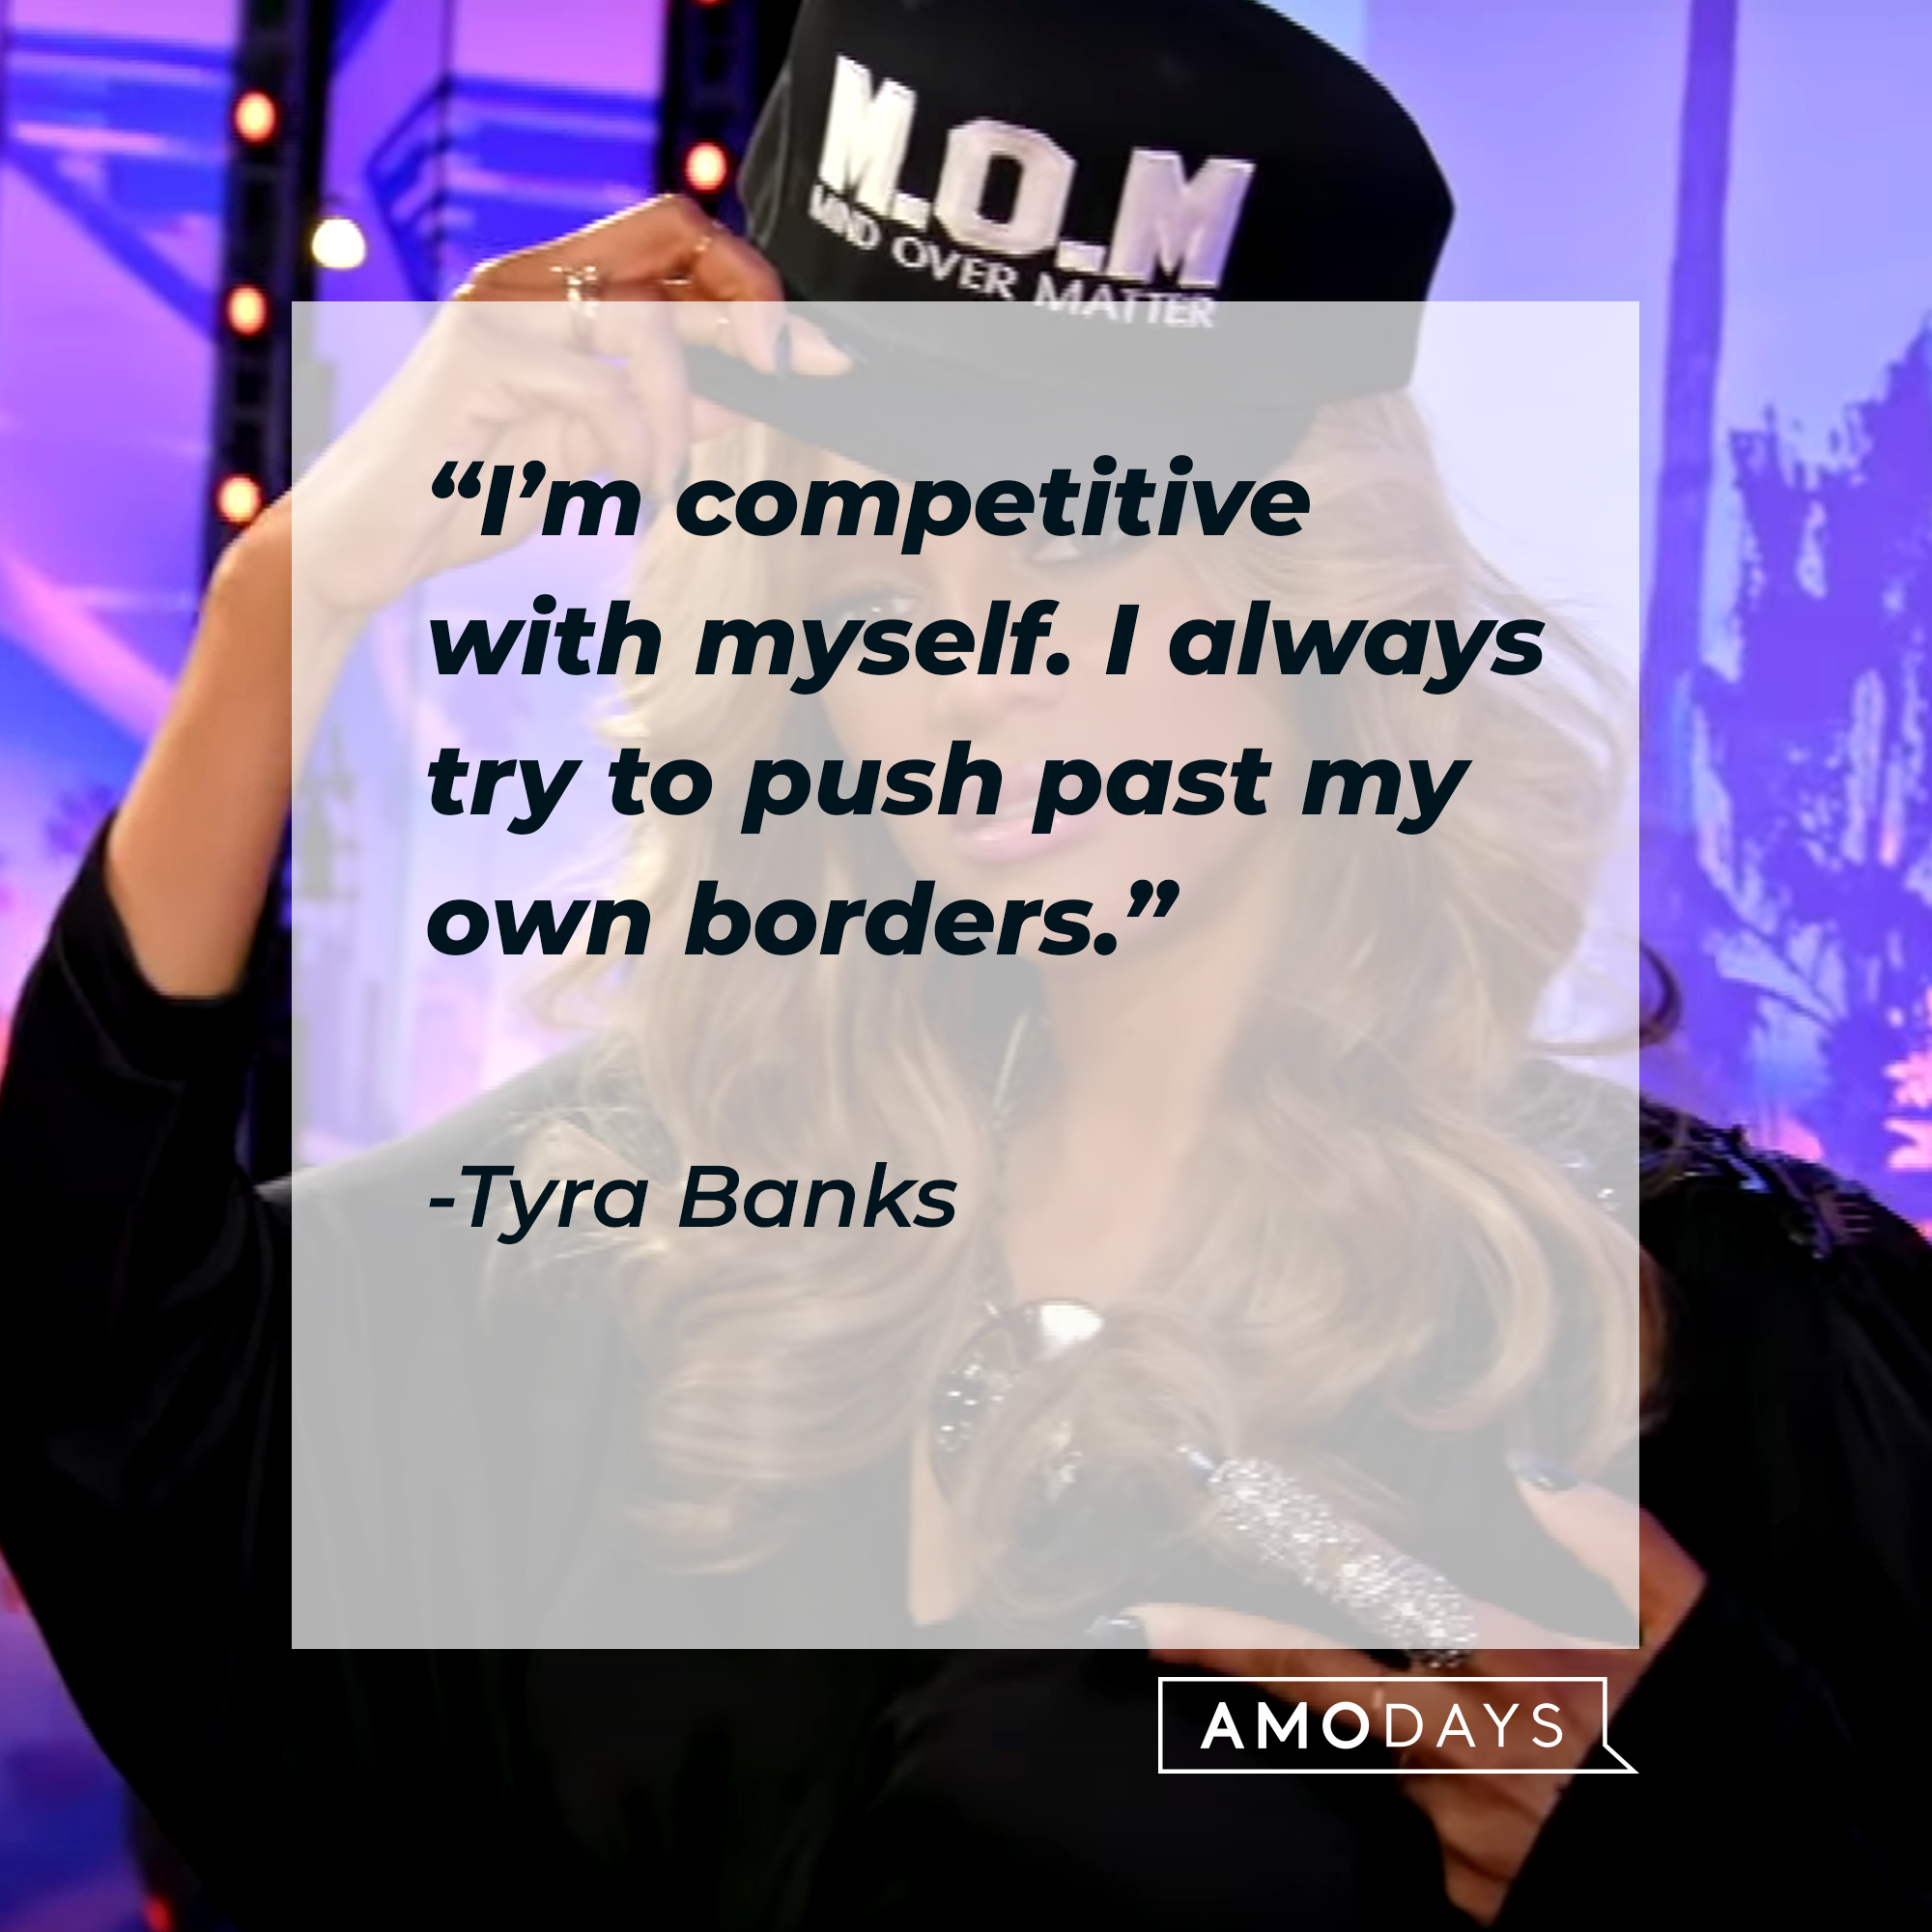 Tyra Banks' quote: "I'm competitive with myself. I always try to push past my own borders." | Source: Getty Images